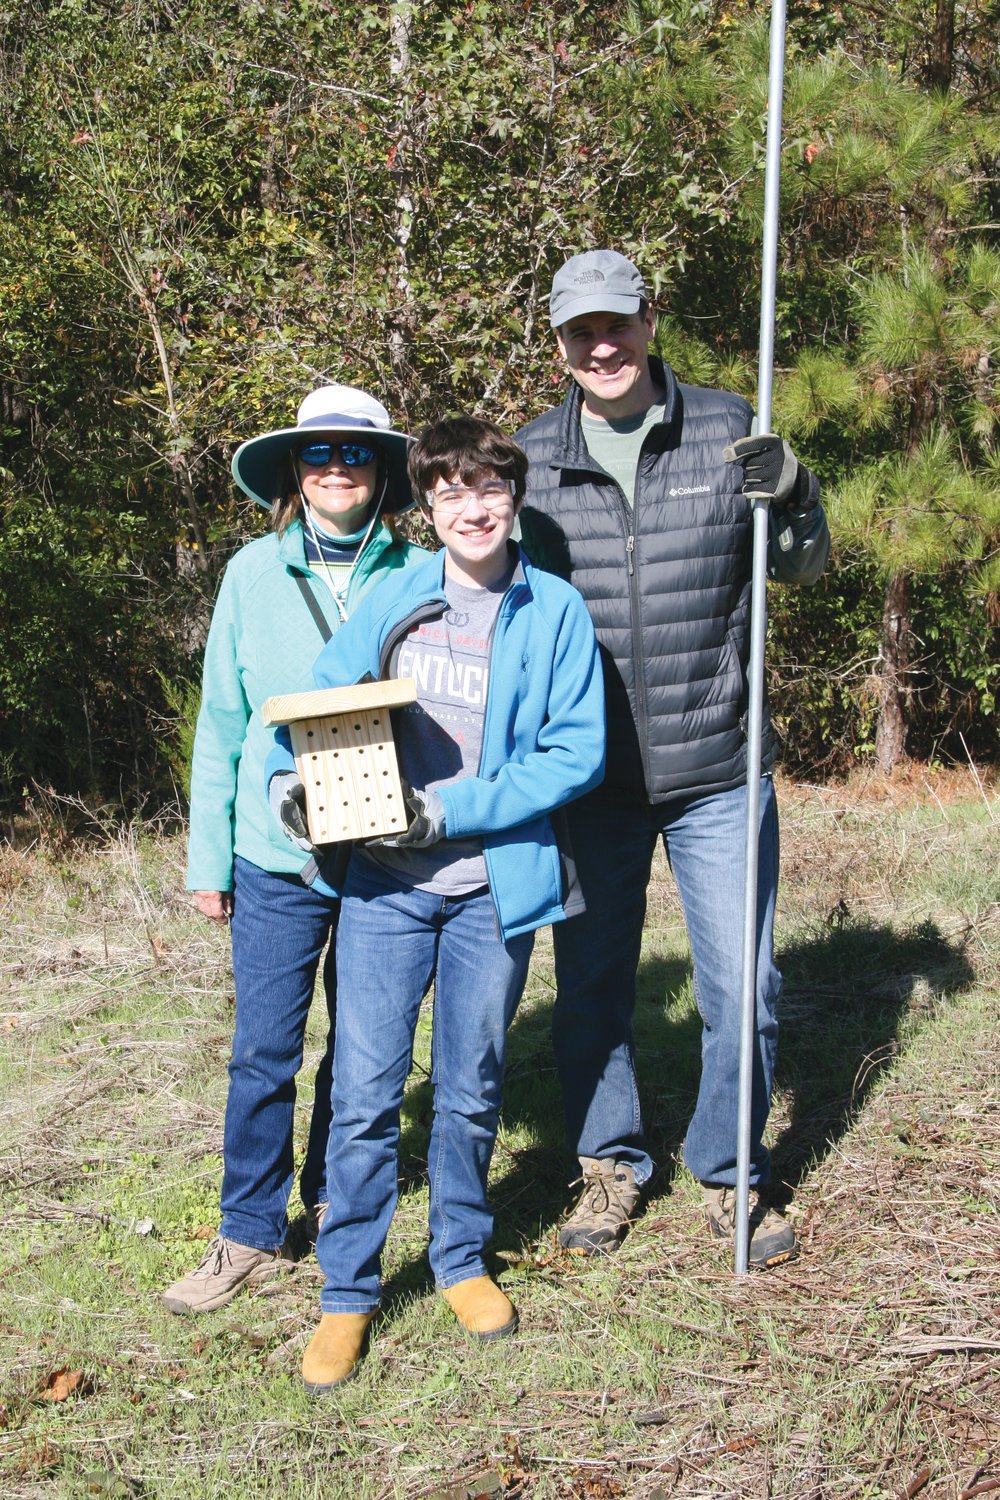 Gretchen Smith stands with Boy Scout Ben Pickens and his father Dr. Ed Pickens installing a bee house in the pollinator meadow created for Friends of Lower Haw as part of an Eagle Scout project.